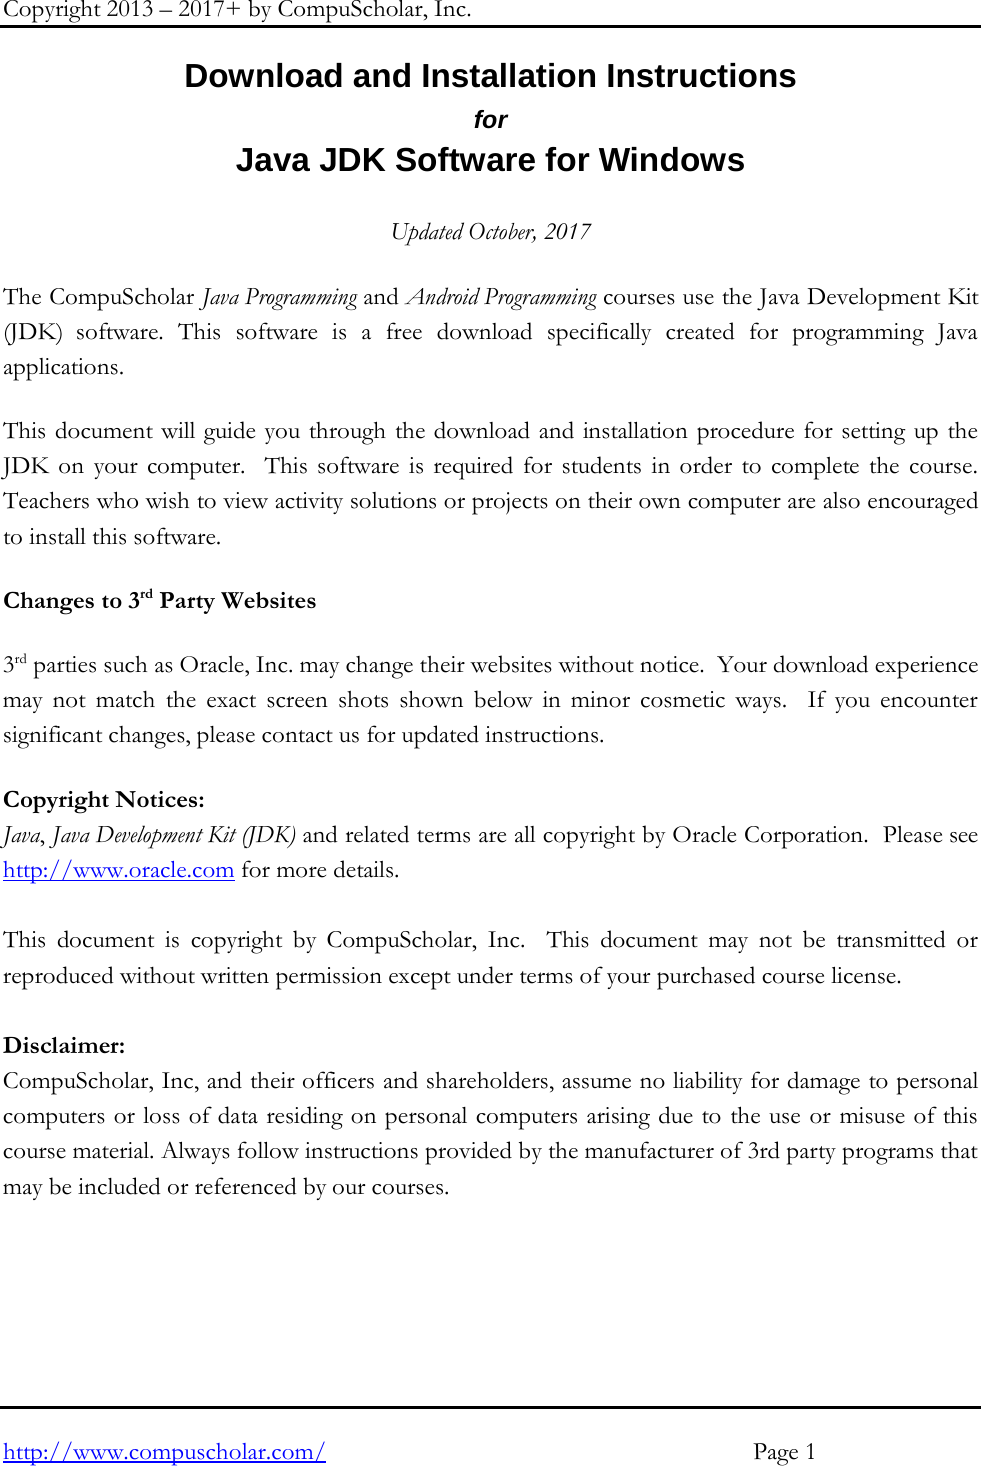 Page 1 of 12 - Java JDK Install Instructions Windows